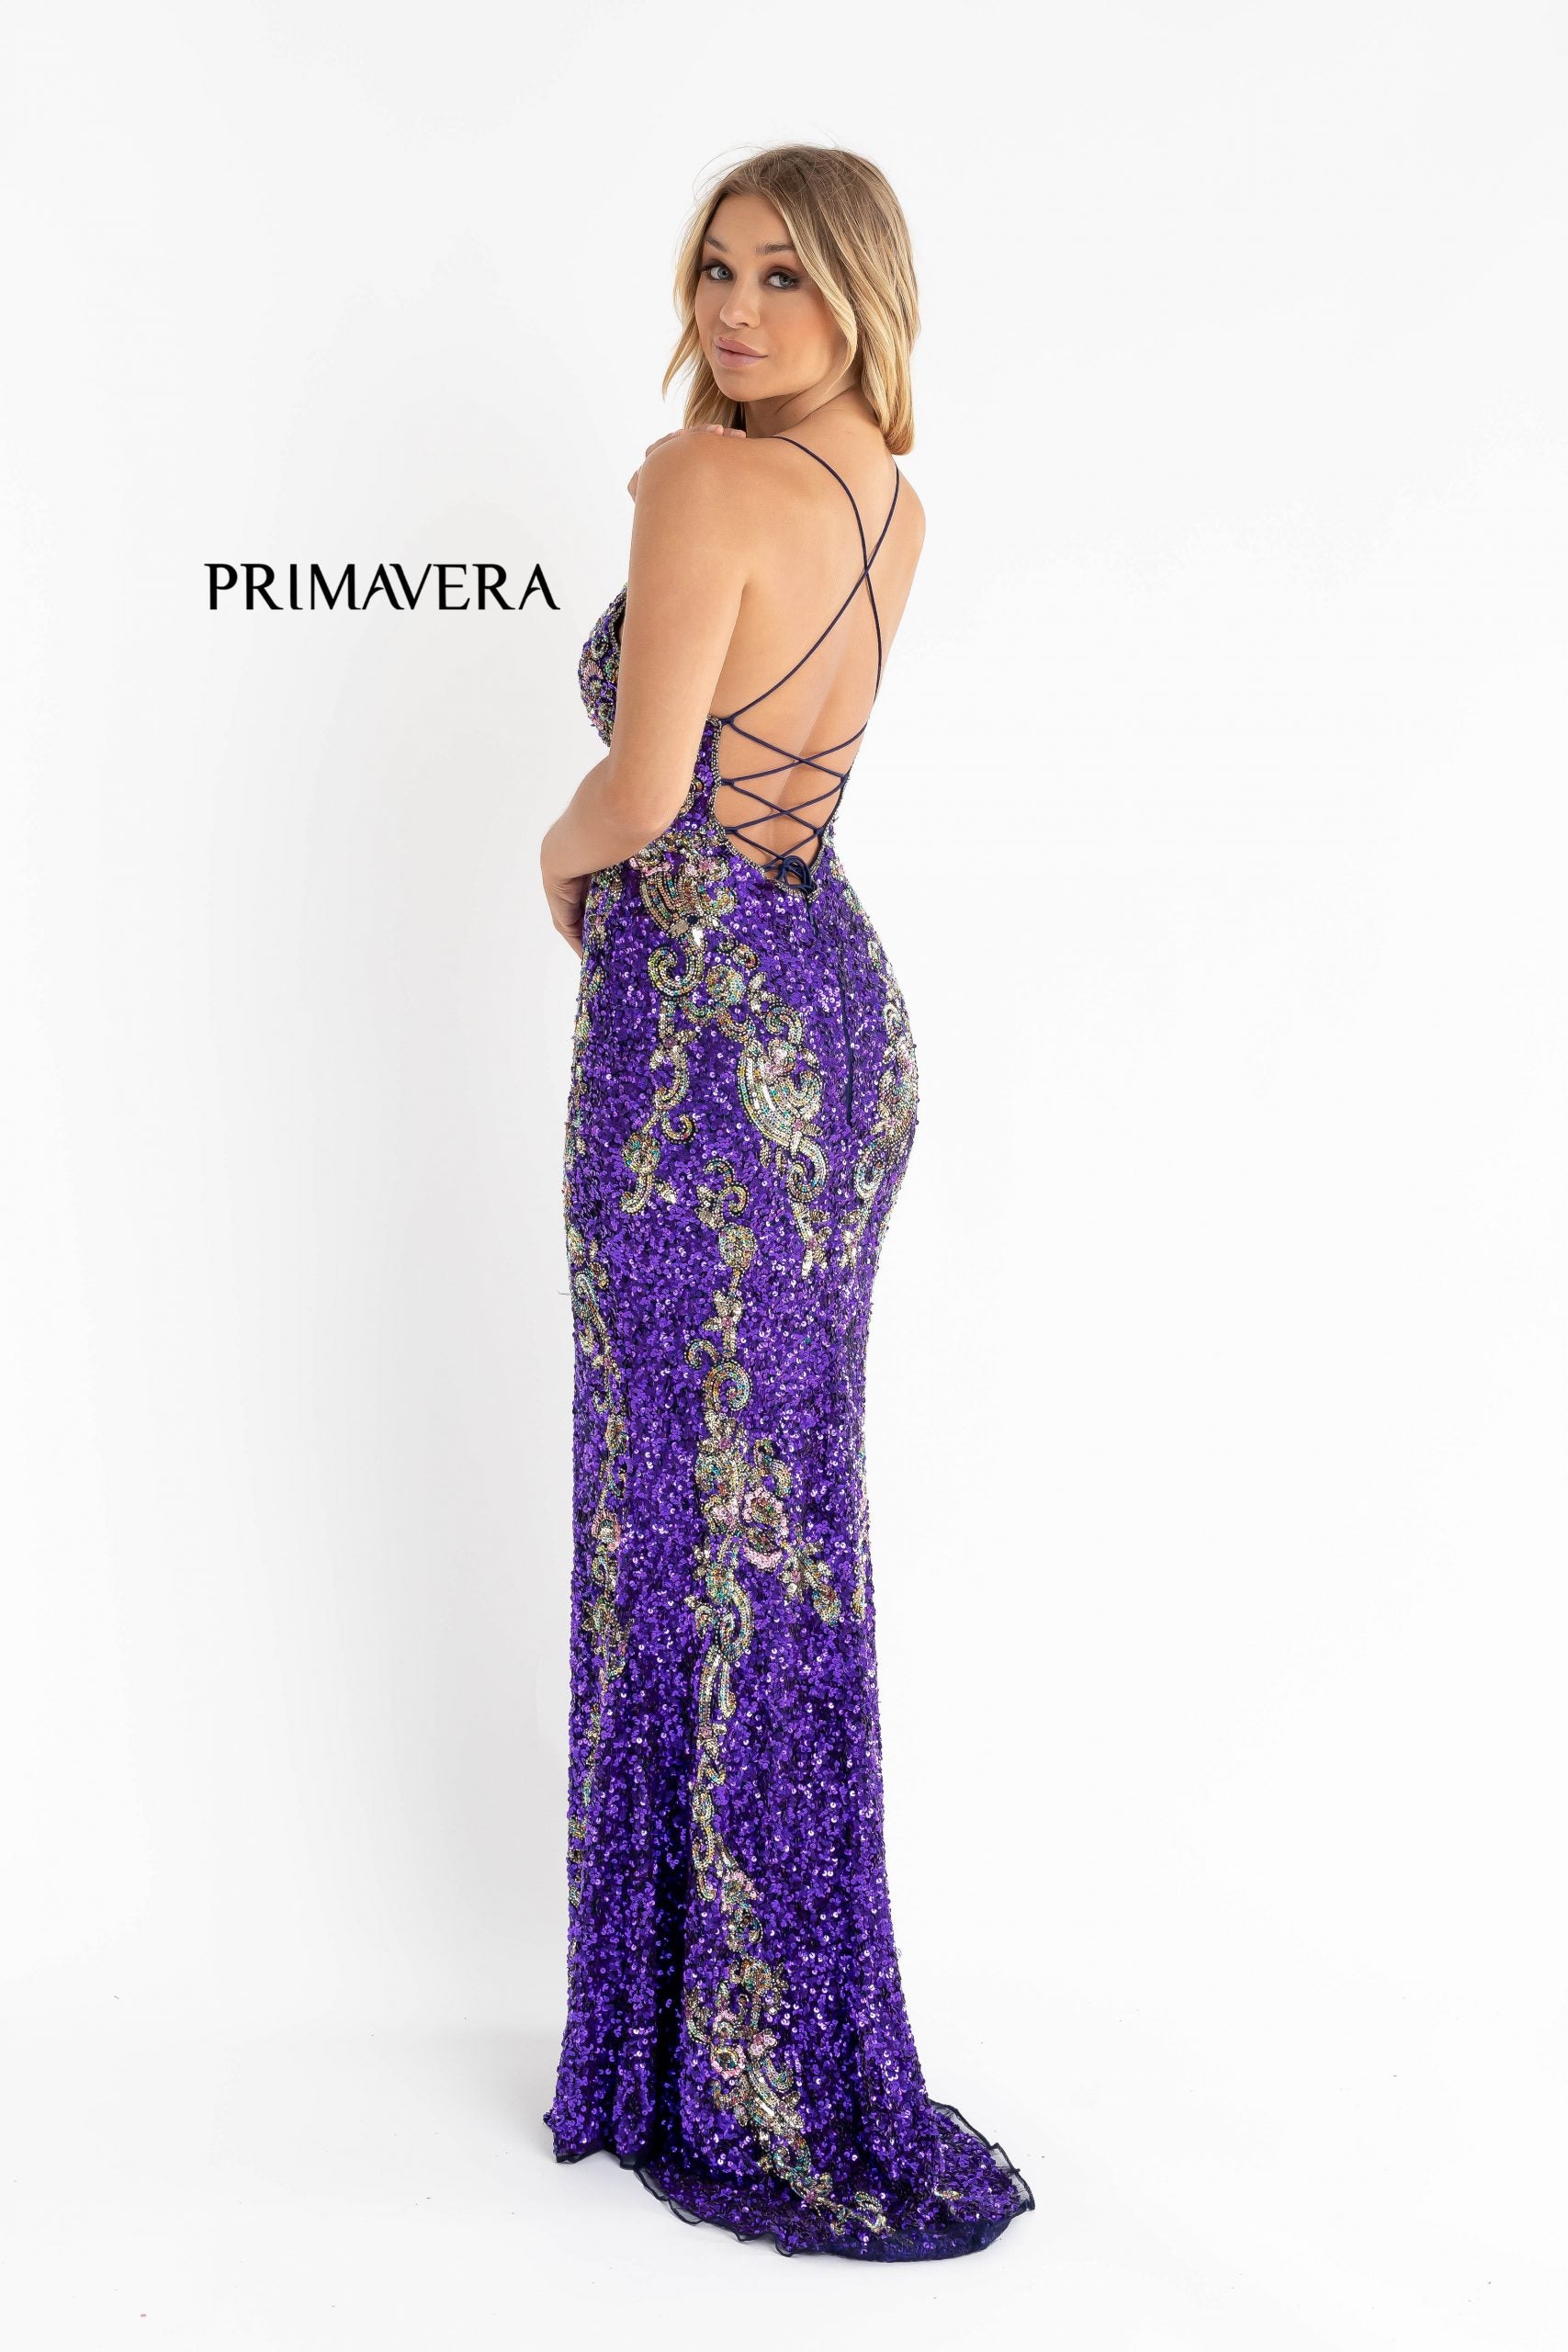 Primavera Couture 3211 Purple is a Long fitted sequin Embellished Formal Evening Gown. This Prom Dress Features a deep V Neck with an open Corset lace up back. Beaded & embellished elegant scroll pattern accentuate curves. Fully beaded prom dress with floral pattern and side slit. Long Sequin Gown featuring a v neckline. slit in the fitted skirt, Slit in Thigh. Stunning Pageant Dress, Prom Gown & More! back